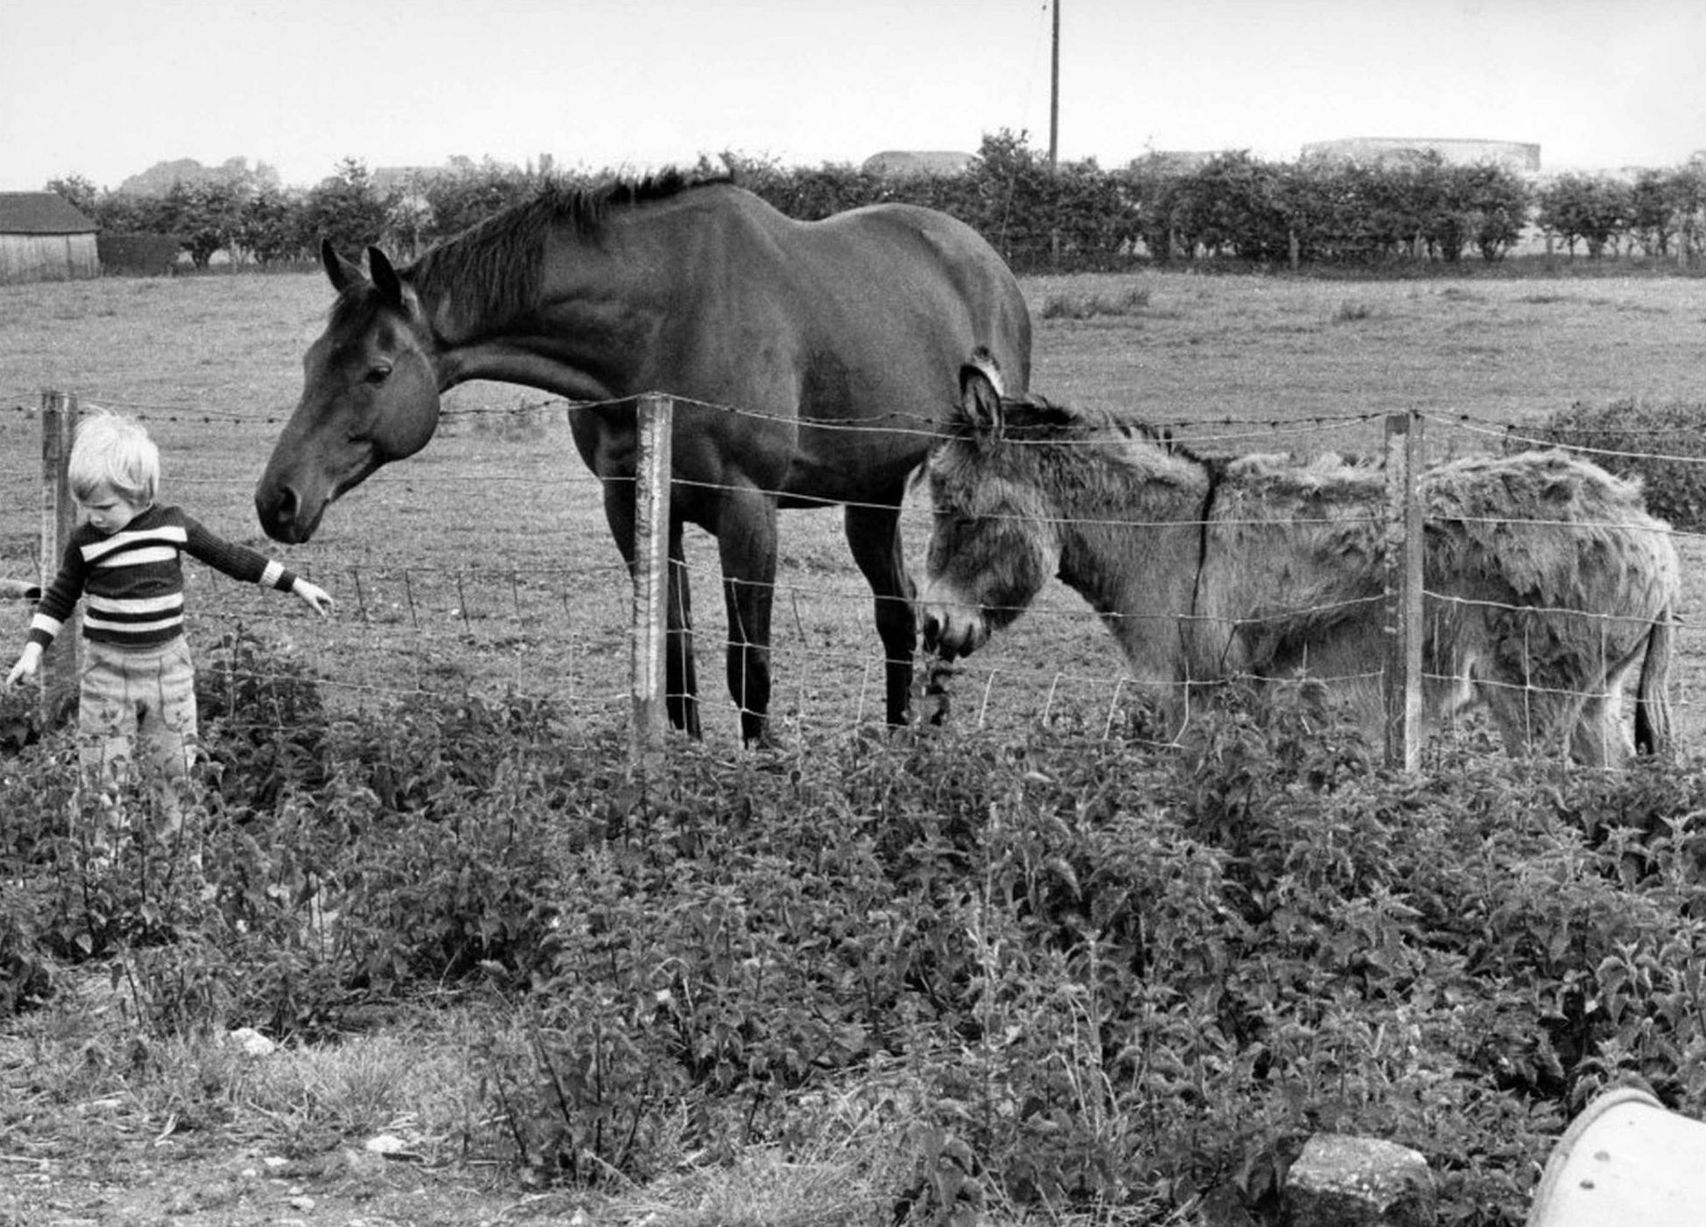 Matthew Ormesher (left) with Red Rum and Andy the donkey in a field at Kew, Southport. Photo by Harry Ormesher